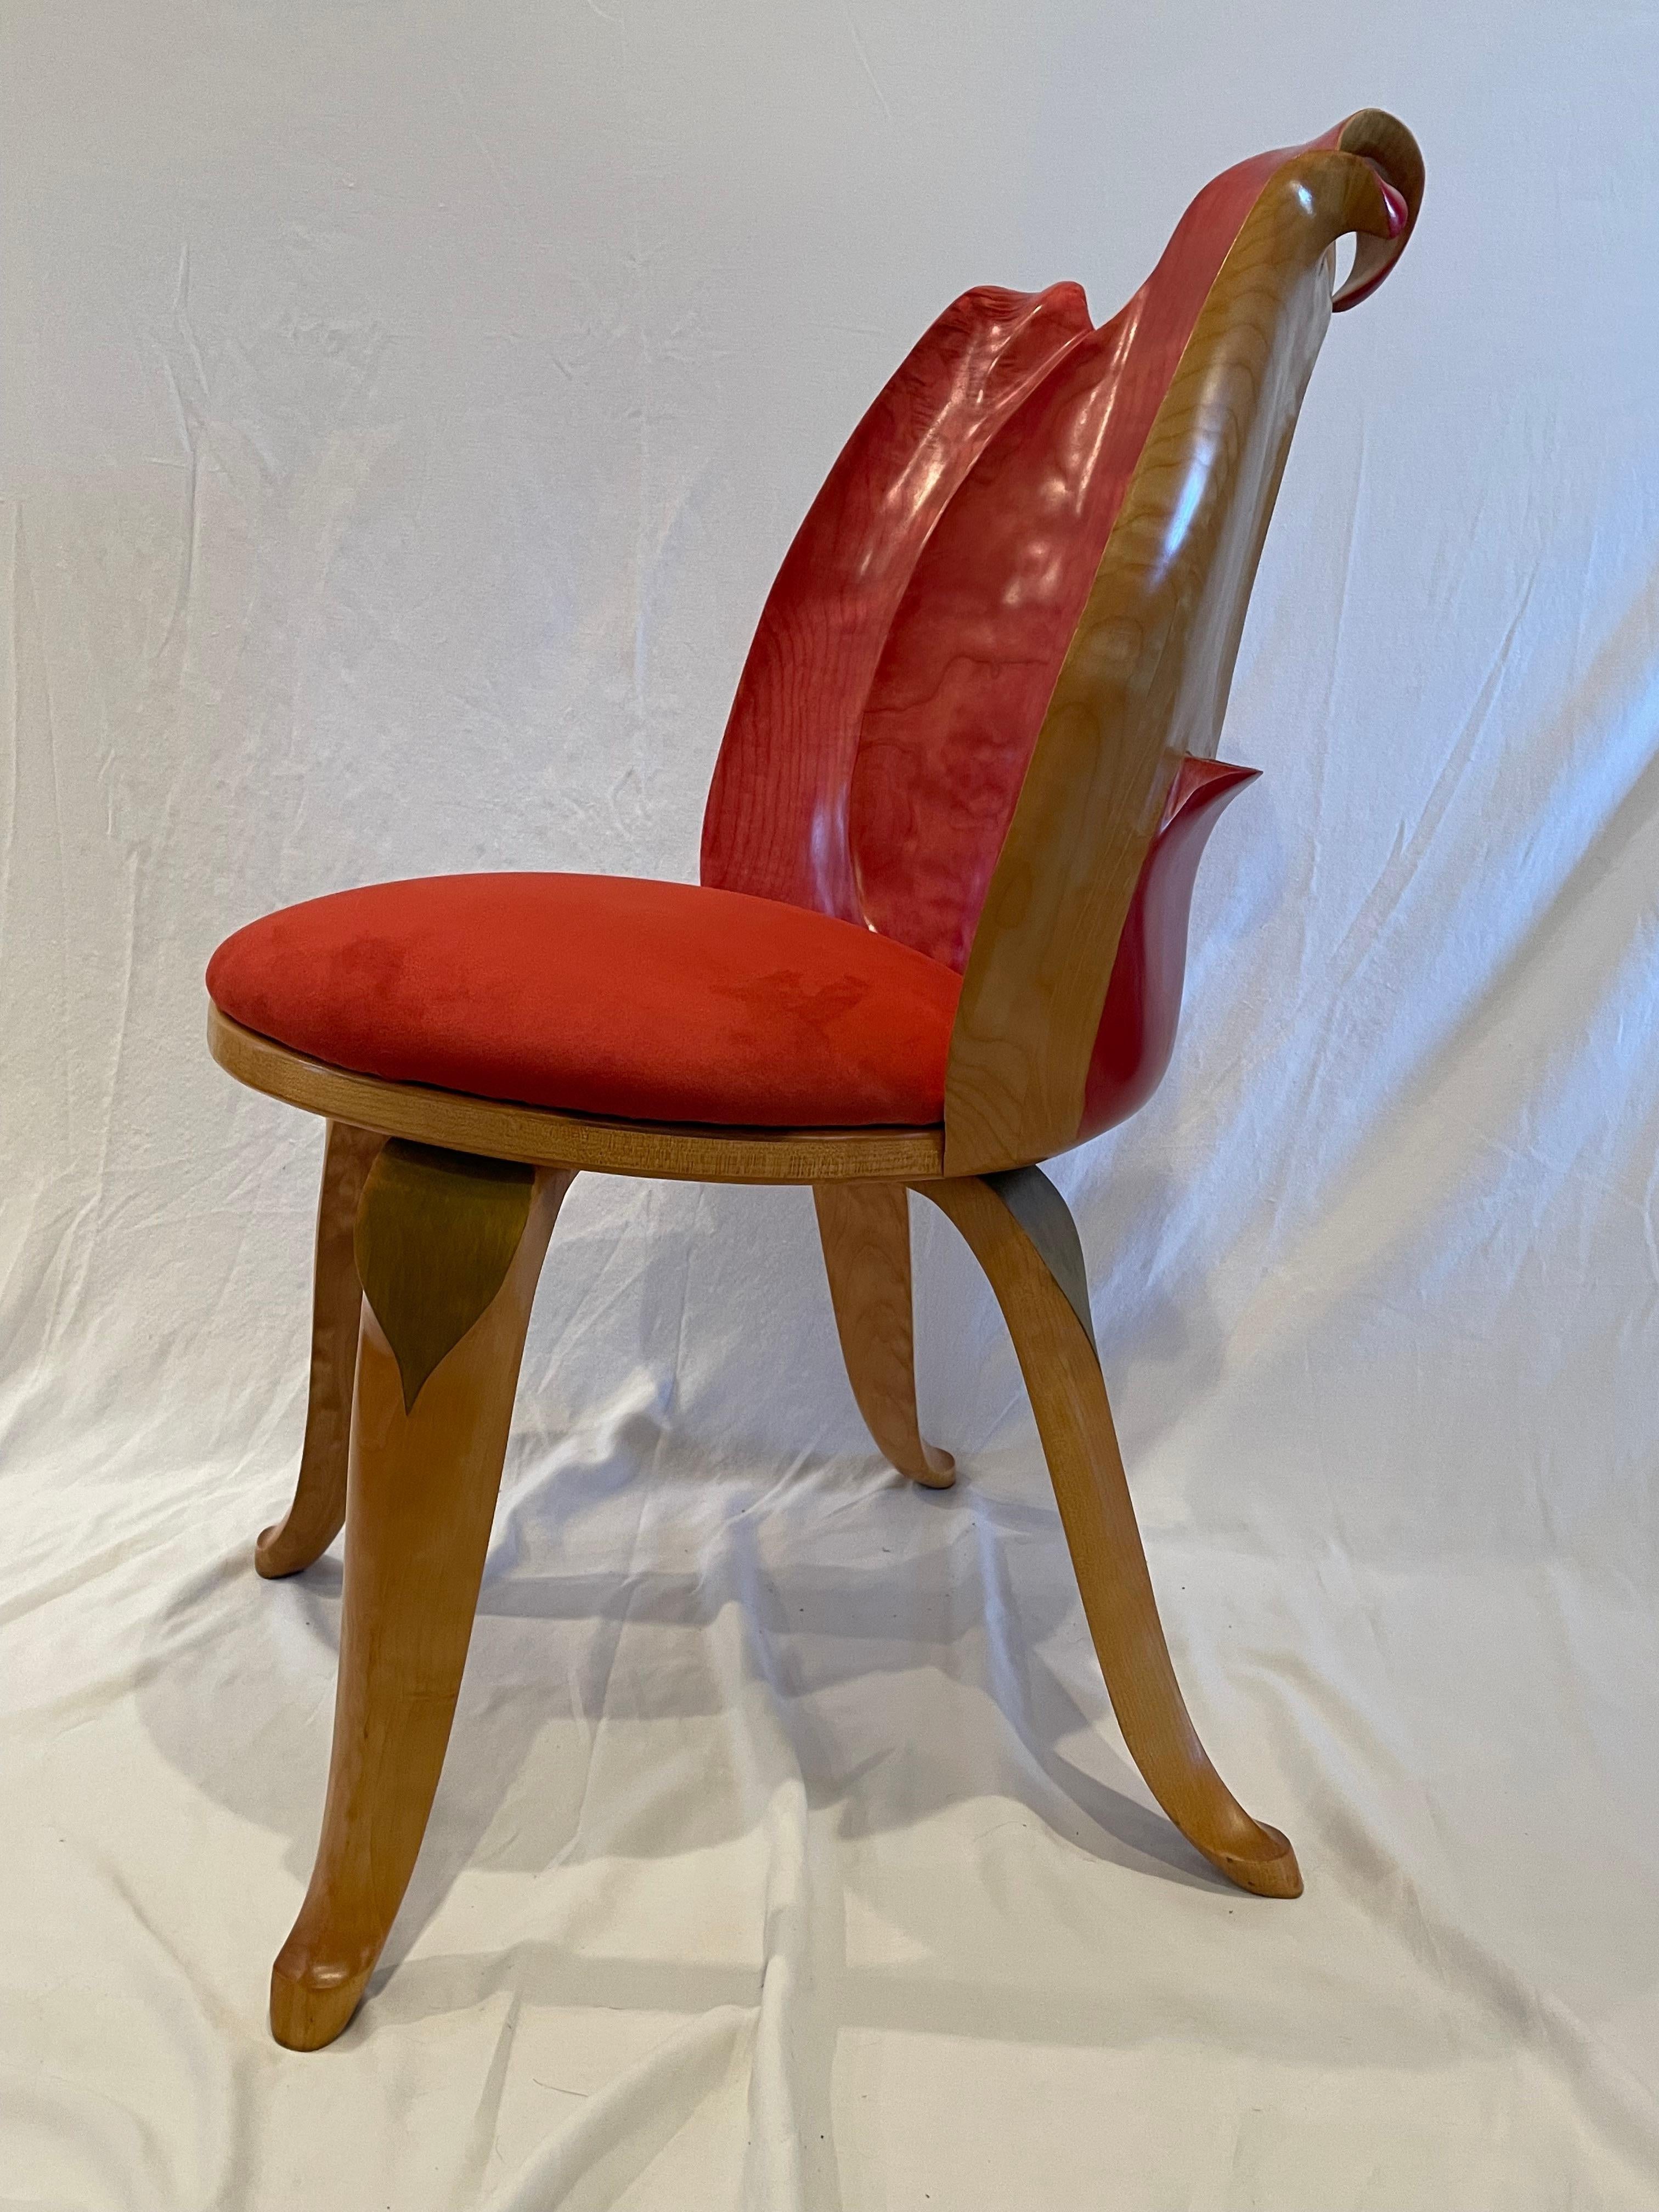 American Red Tulip Chair For Sale